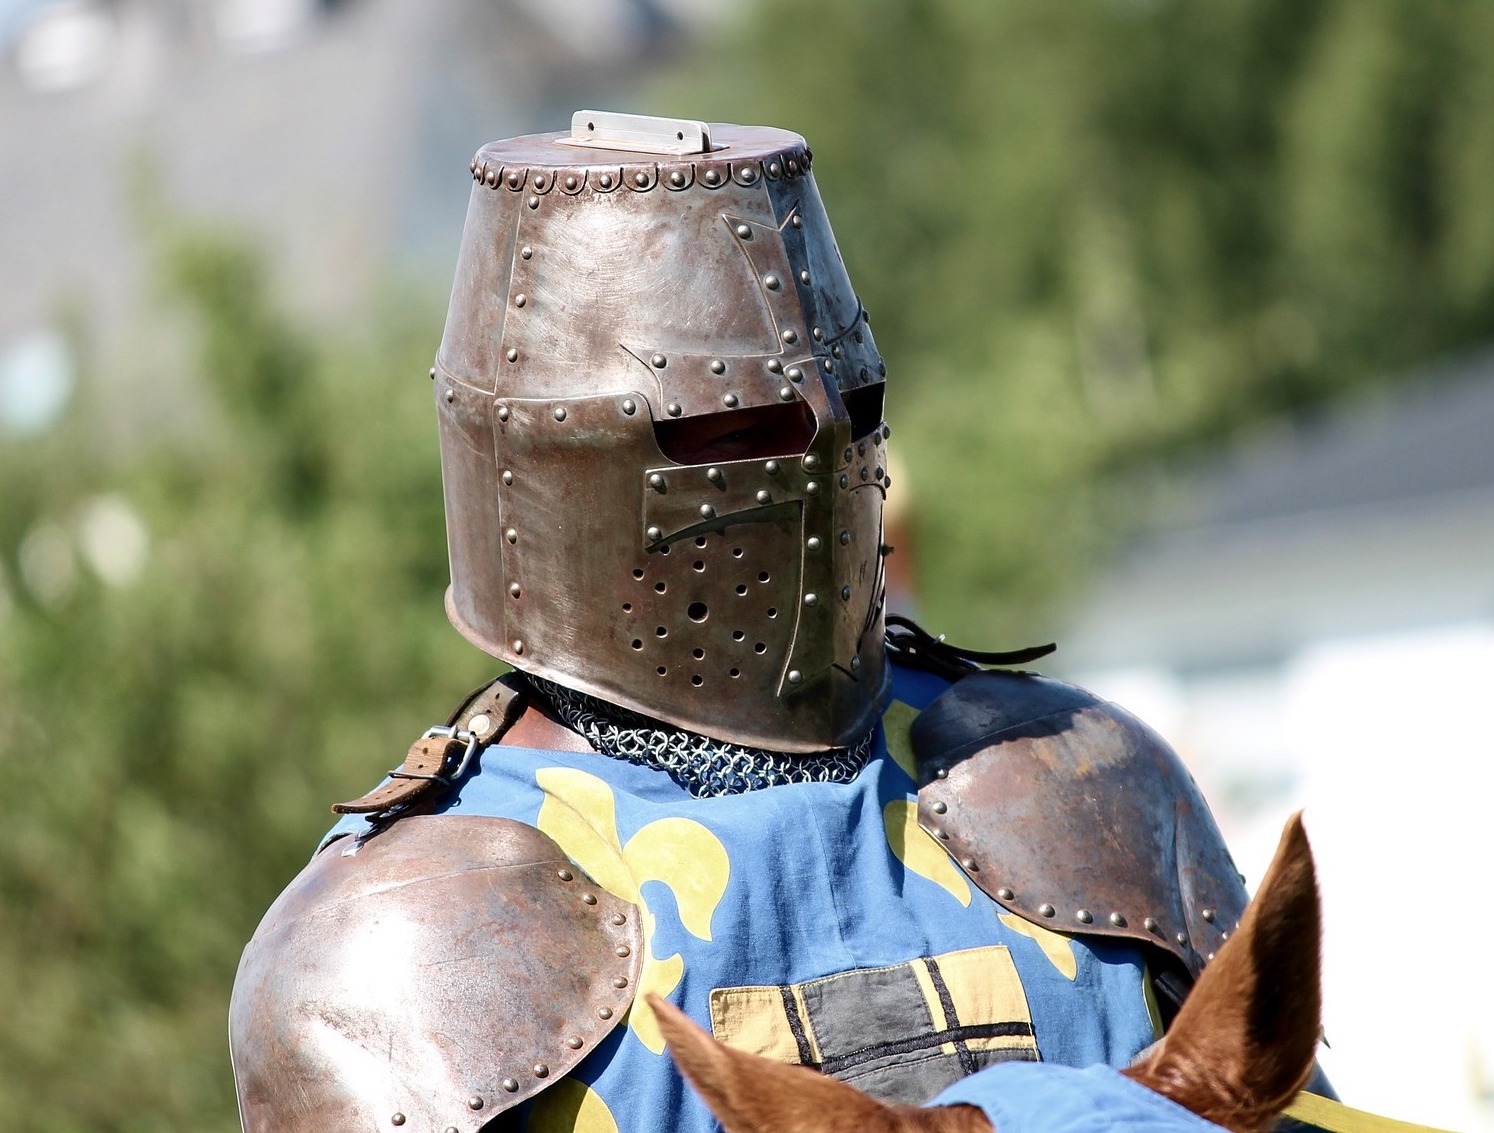 first knight armor